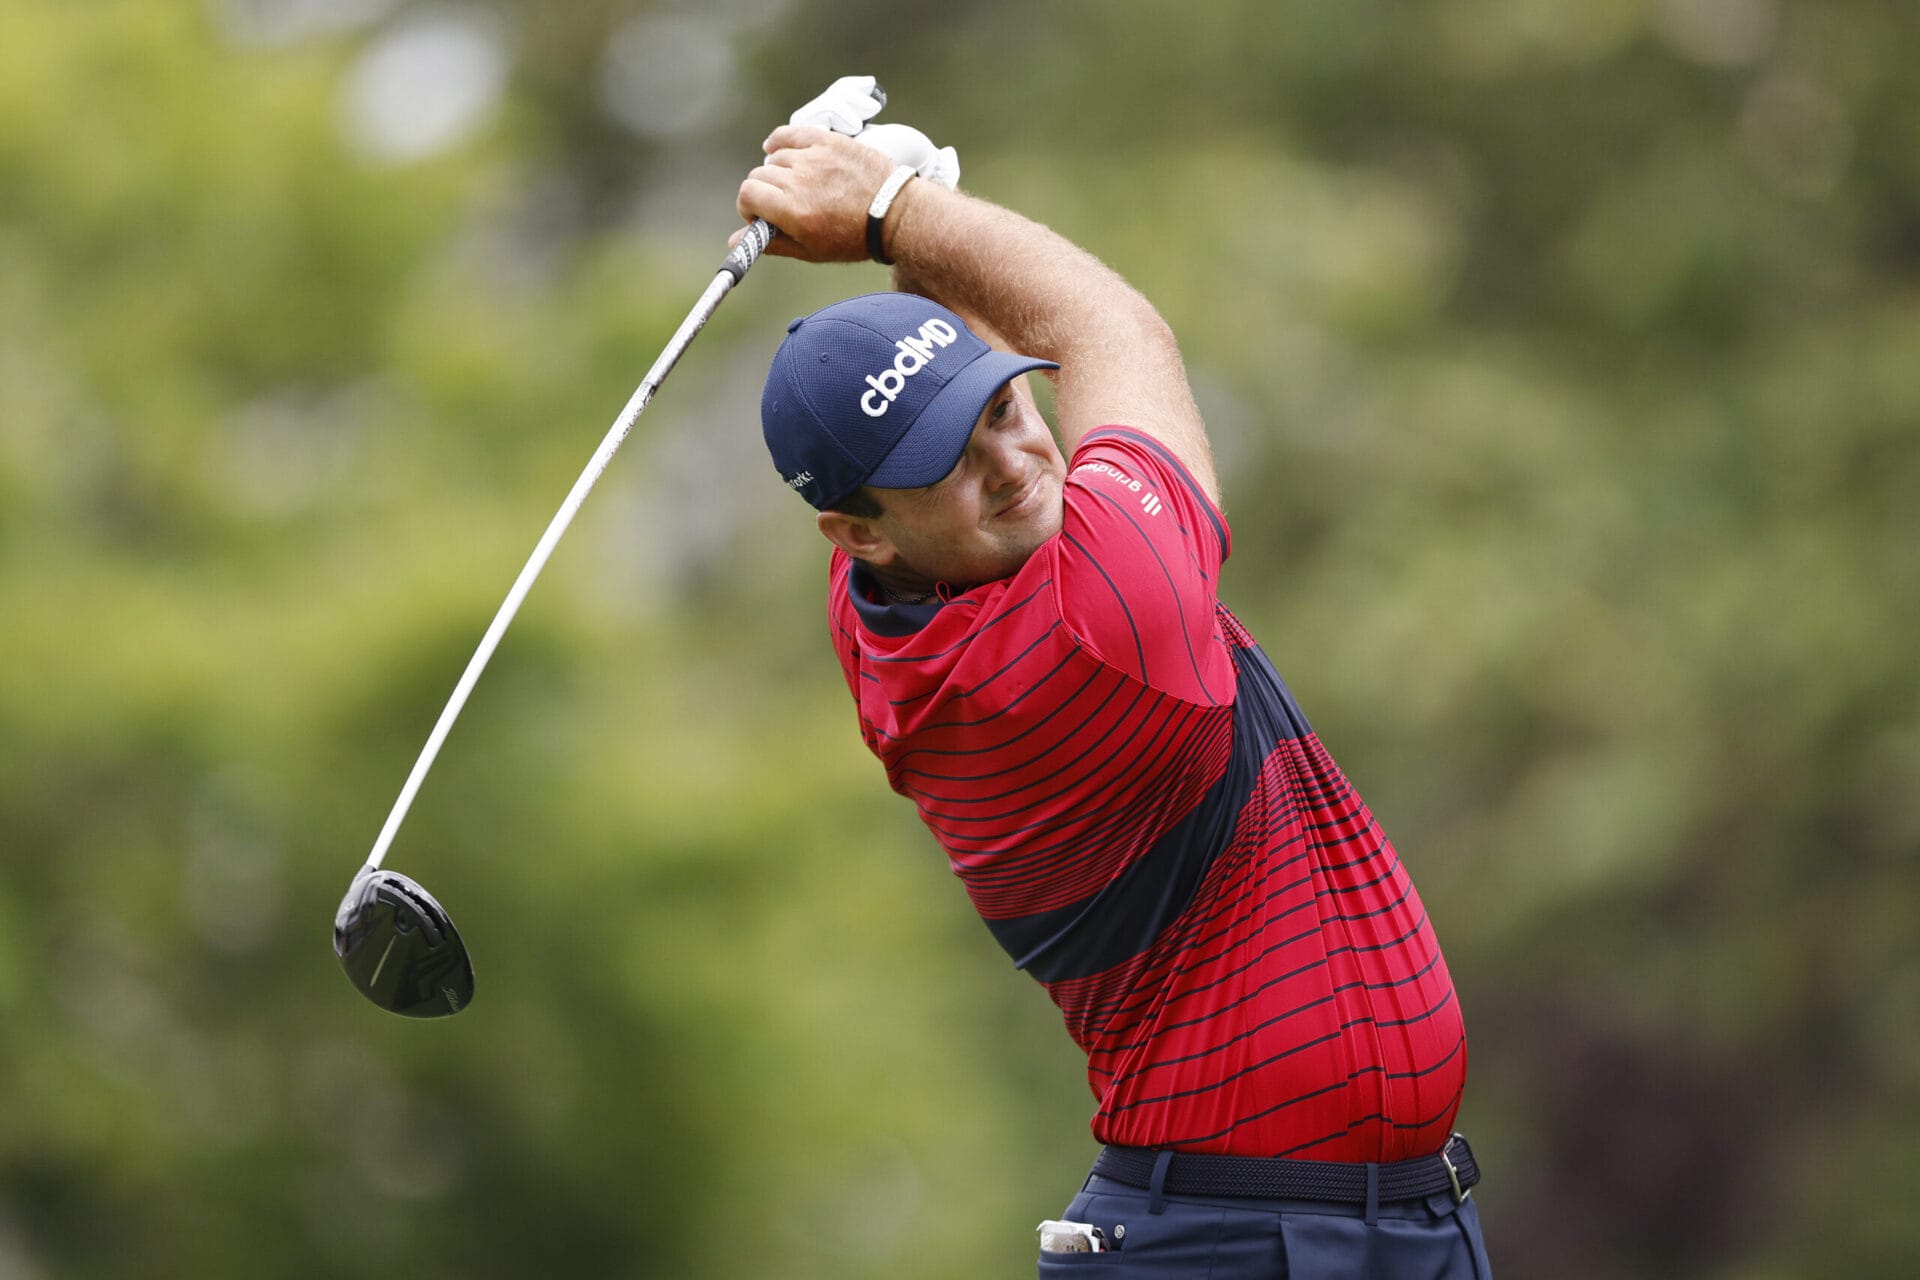 CROMWELL, CONNECTICUT - JUNE 27: Patrick Reed of the United States plays his shot from the sixth tee during the final round of the Travelers Championship at TPC River Highlands on June 27, 2021 in Cromwell, Connecticut.